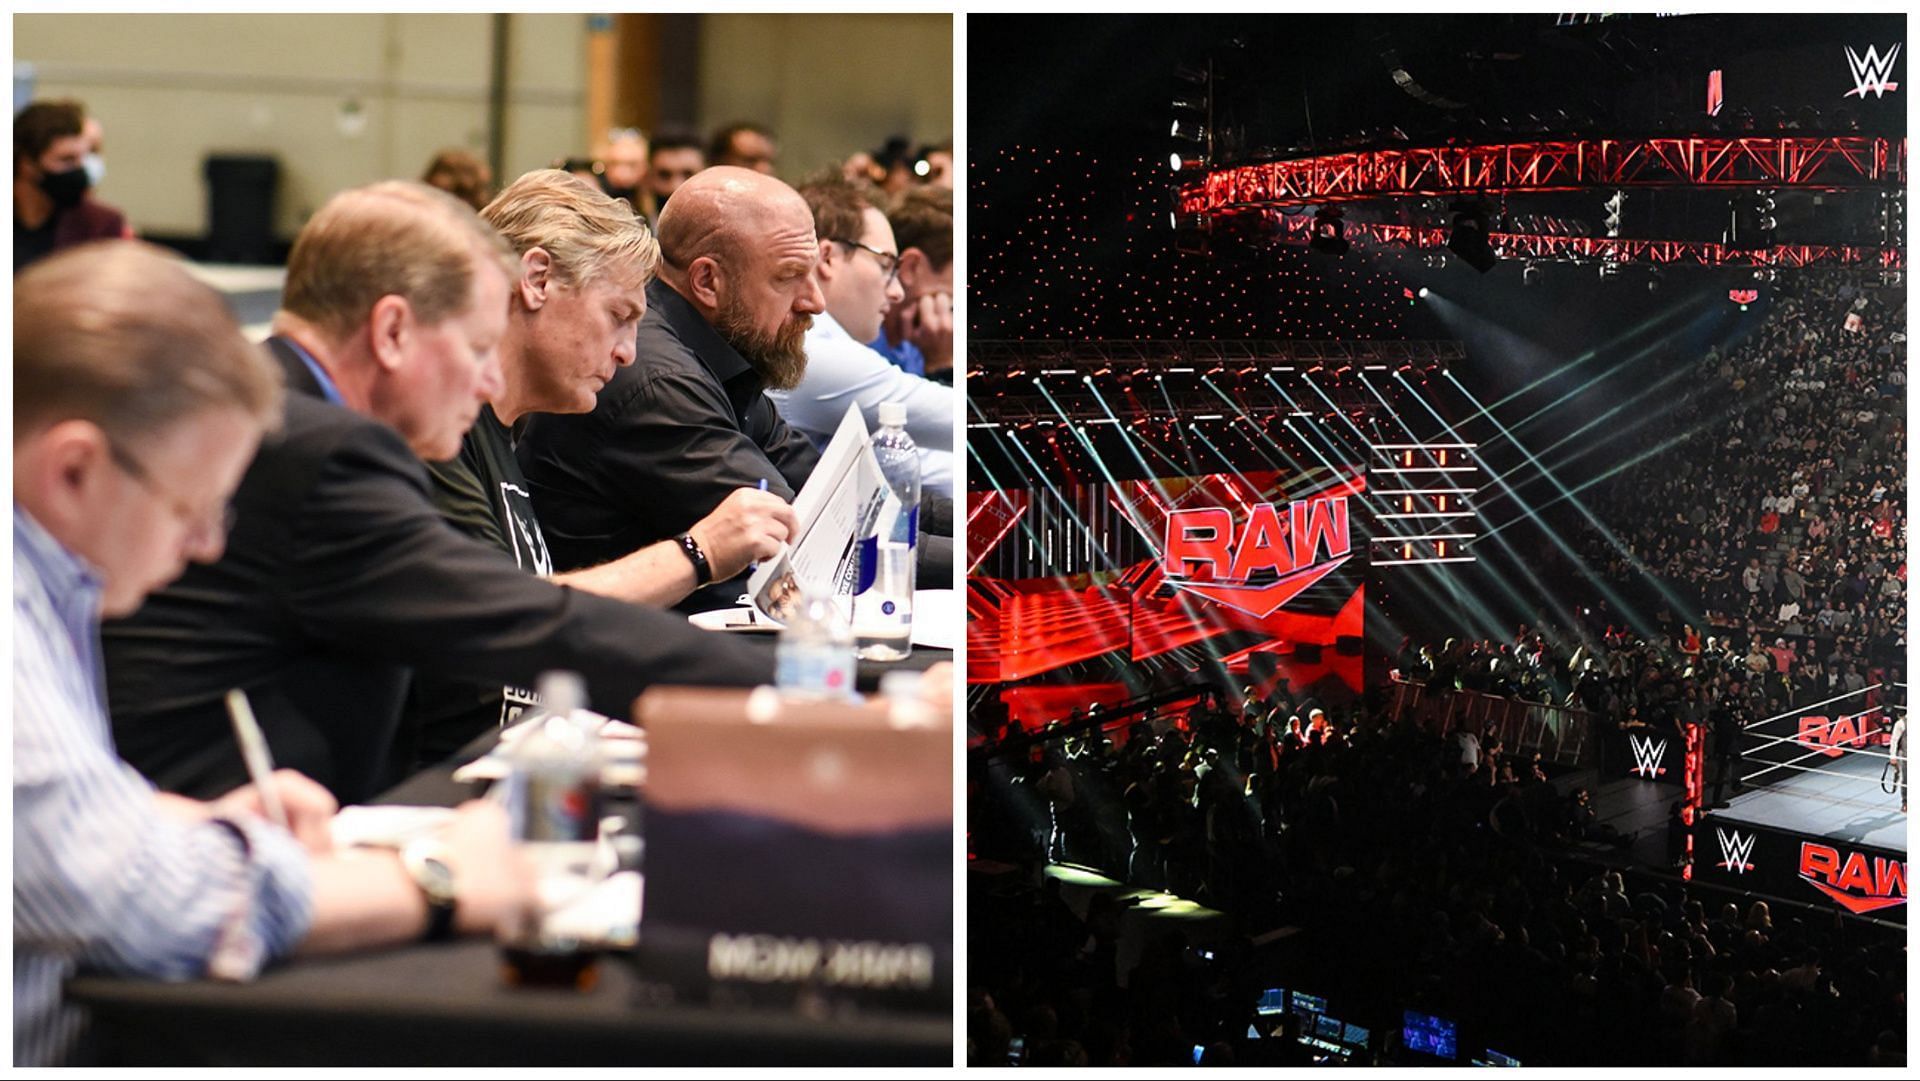 The WWE Universe packs local arena for RAW, Triple H and other WWE officials take notes at tryout